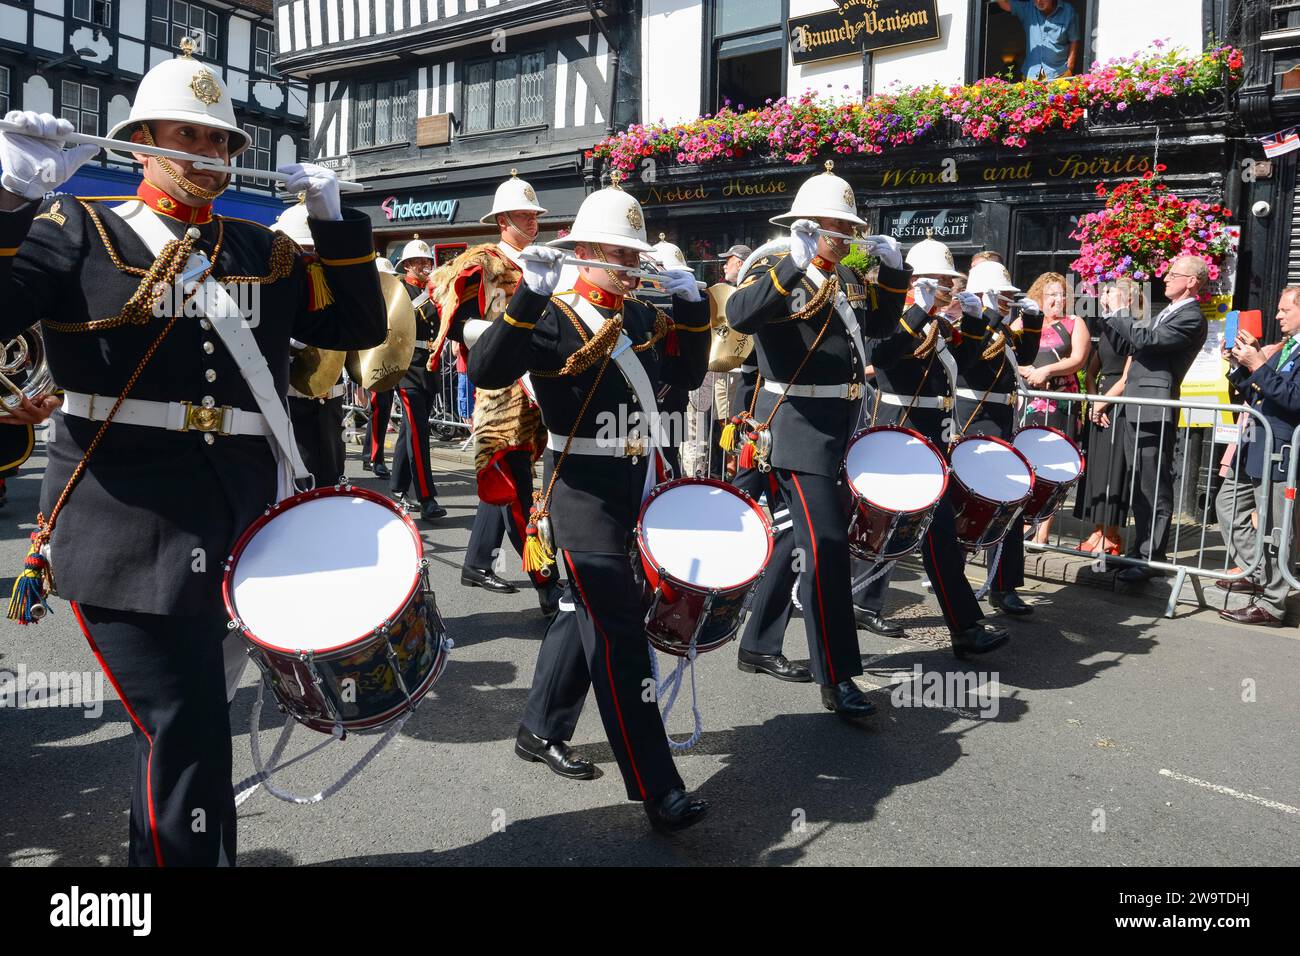 Royal Band marching at Armed Forces Day, Salisbury, UK, 2019 Stock Photo